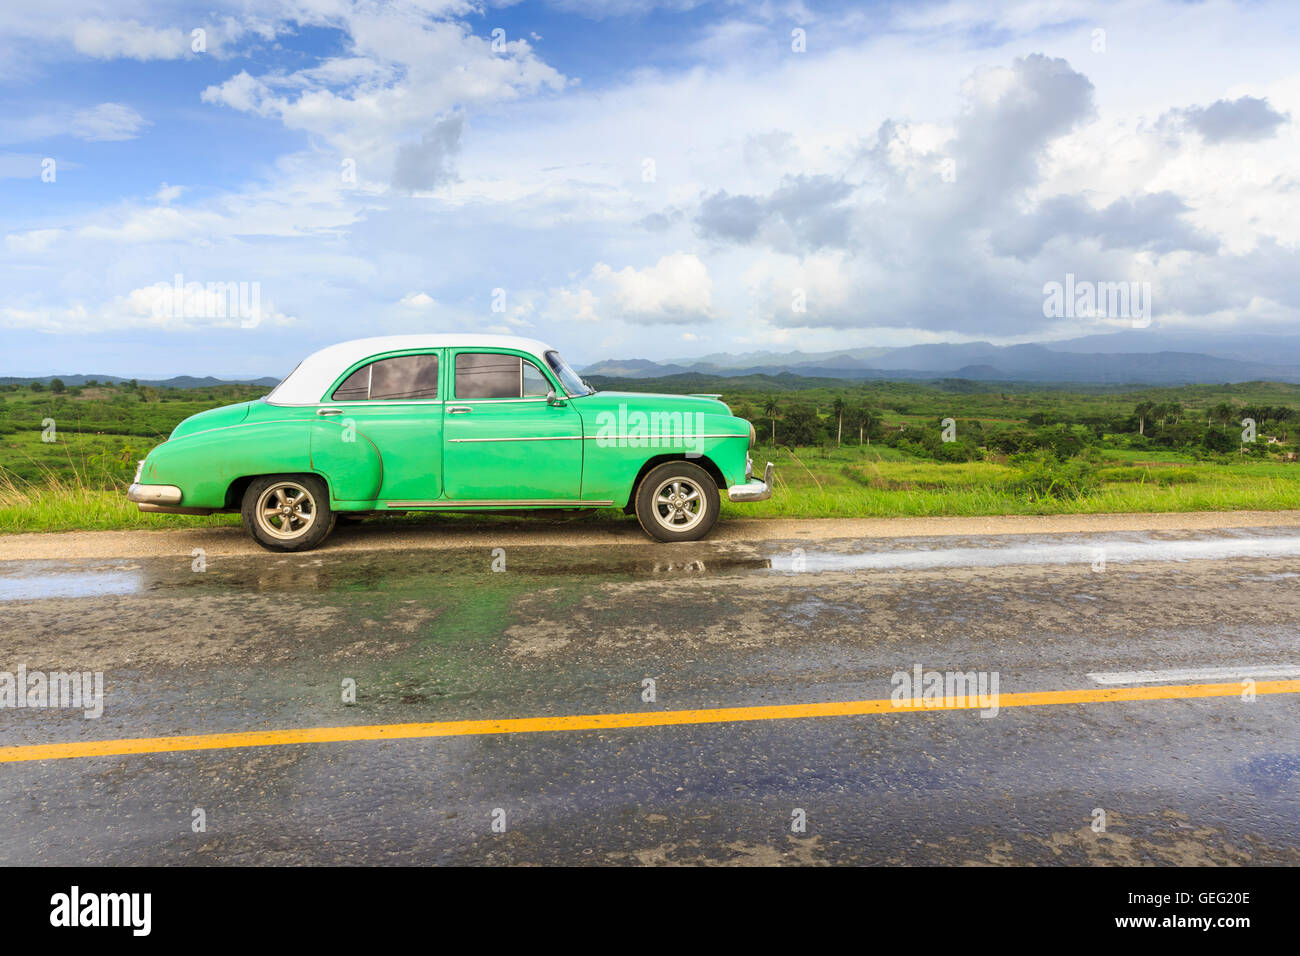 Old green classic car parked on the road in lush green countryside, Sancti Spiritus Province, Cuba Stock Photo